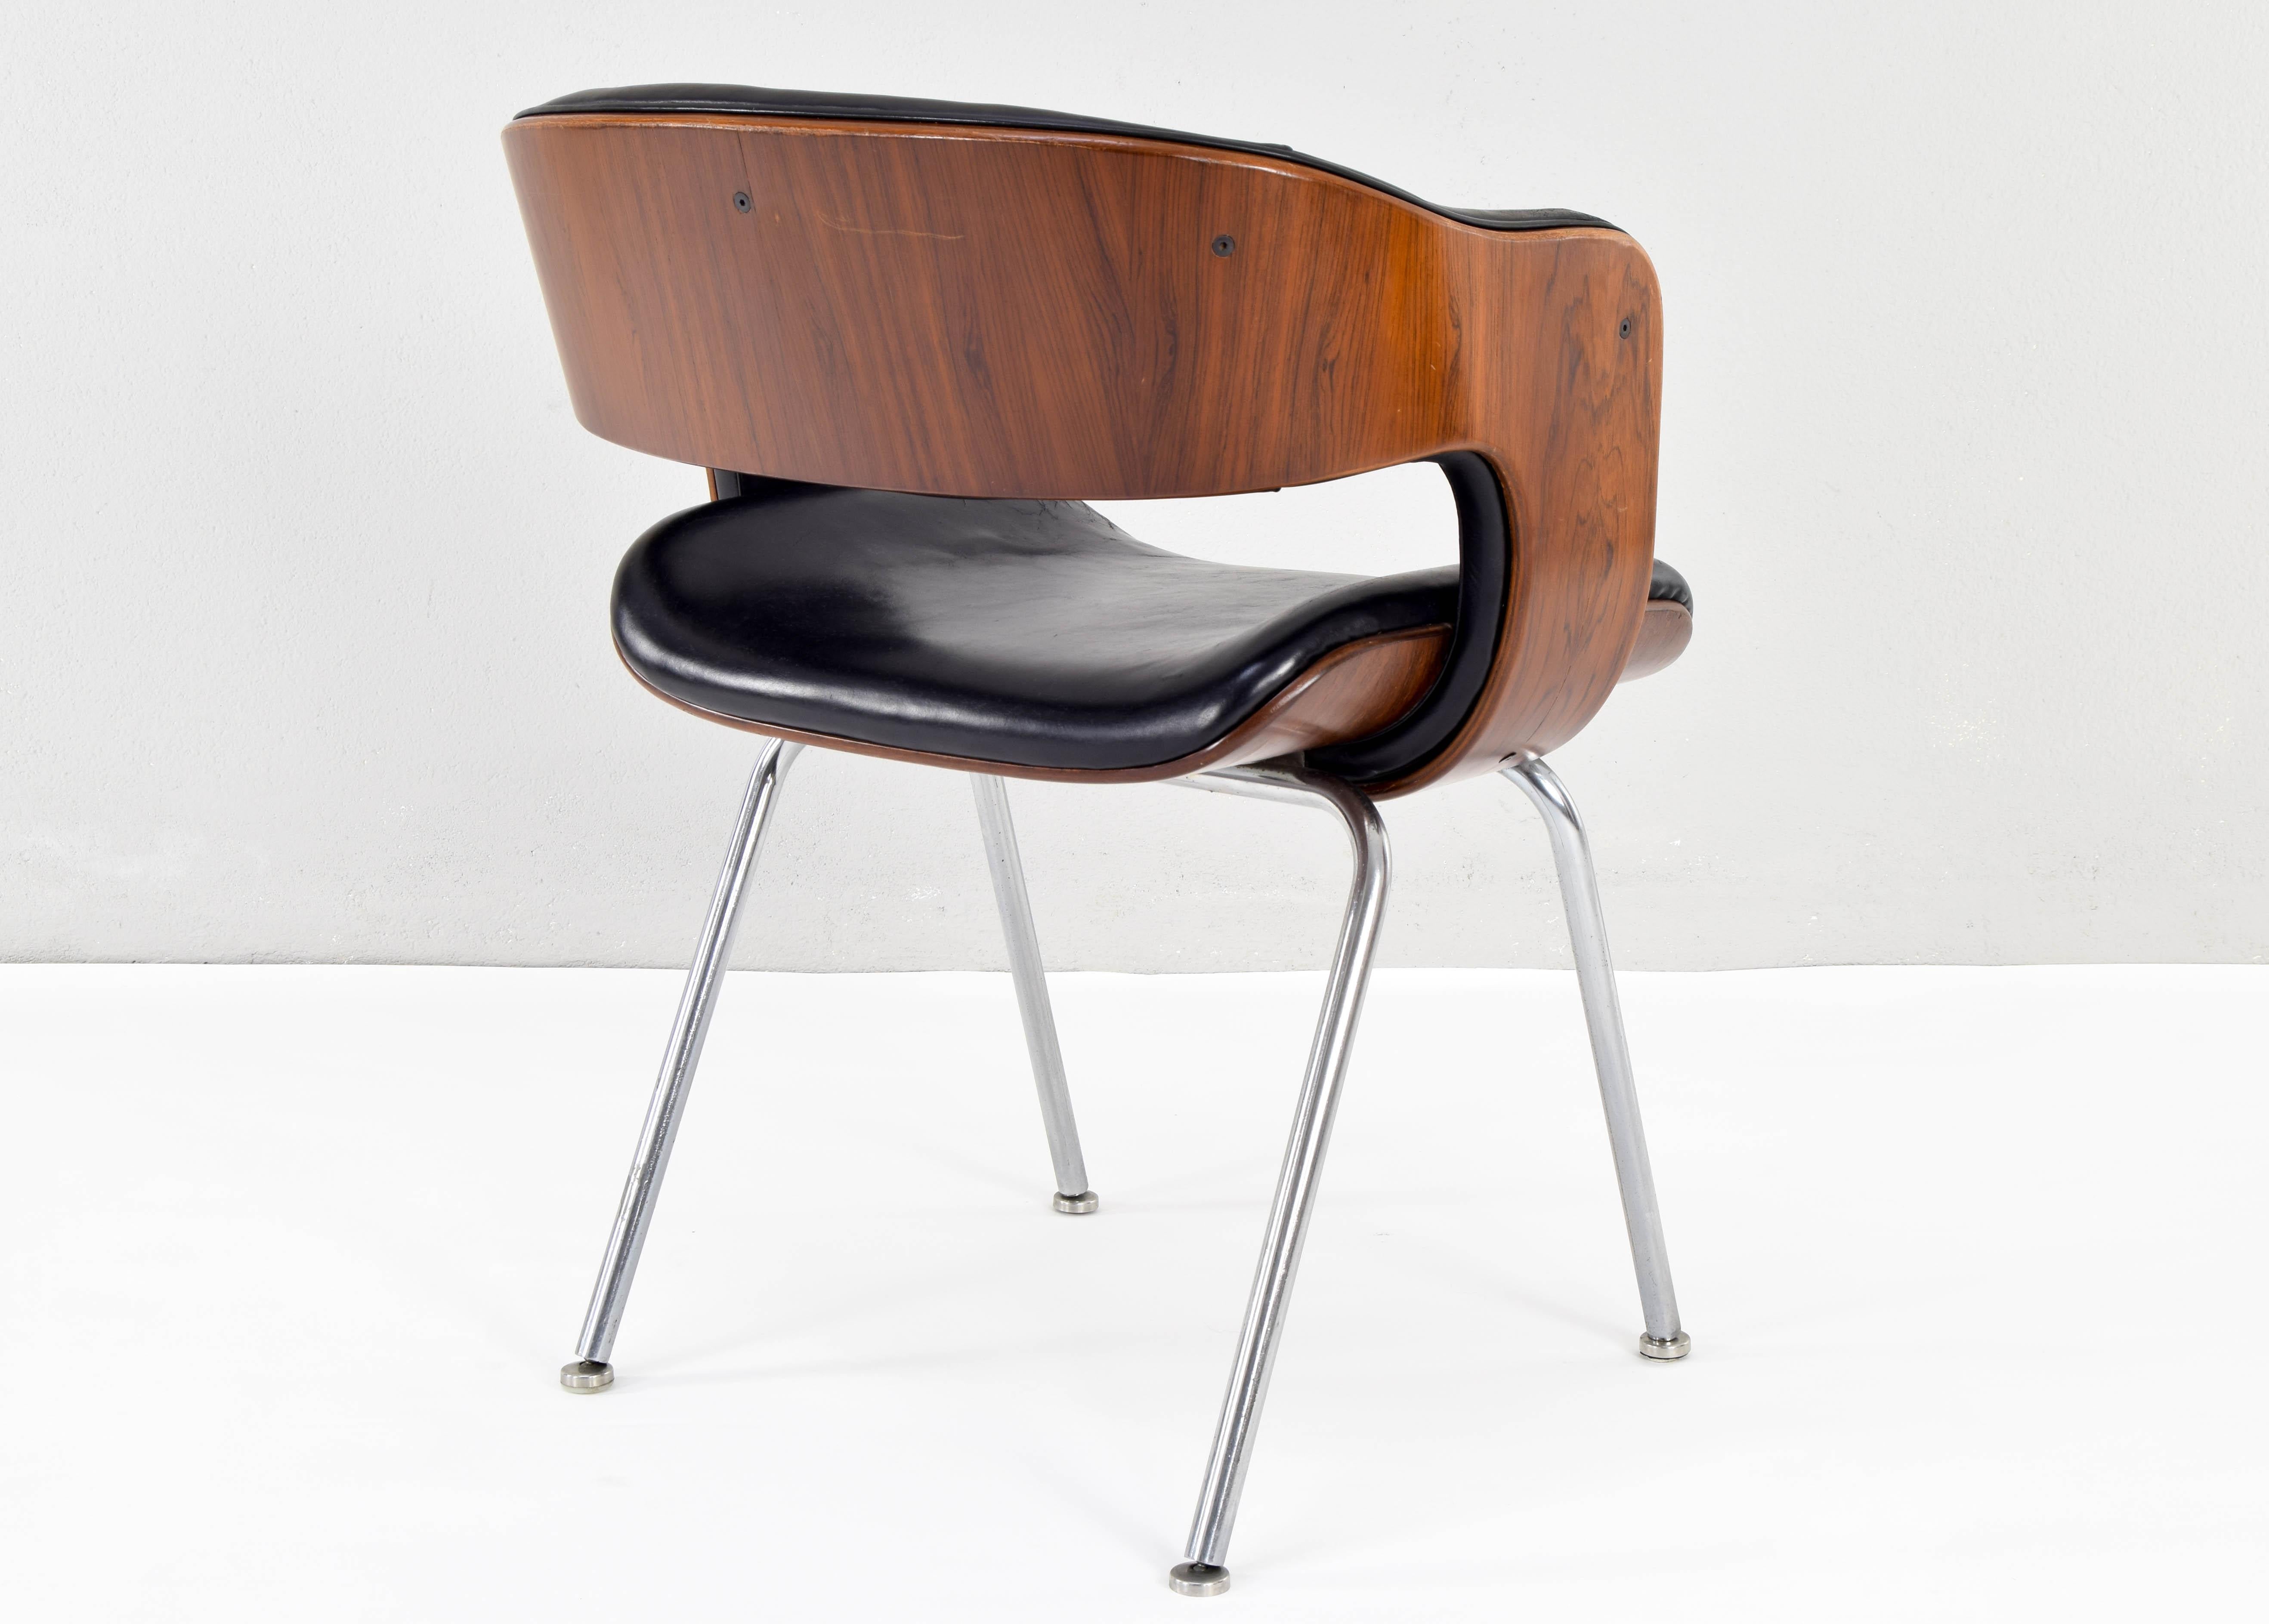 Laminated Mid-Century Modern Oxford Chair by Martin Grierson for Arflex, Spain, 1963